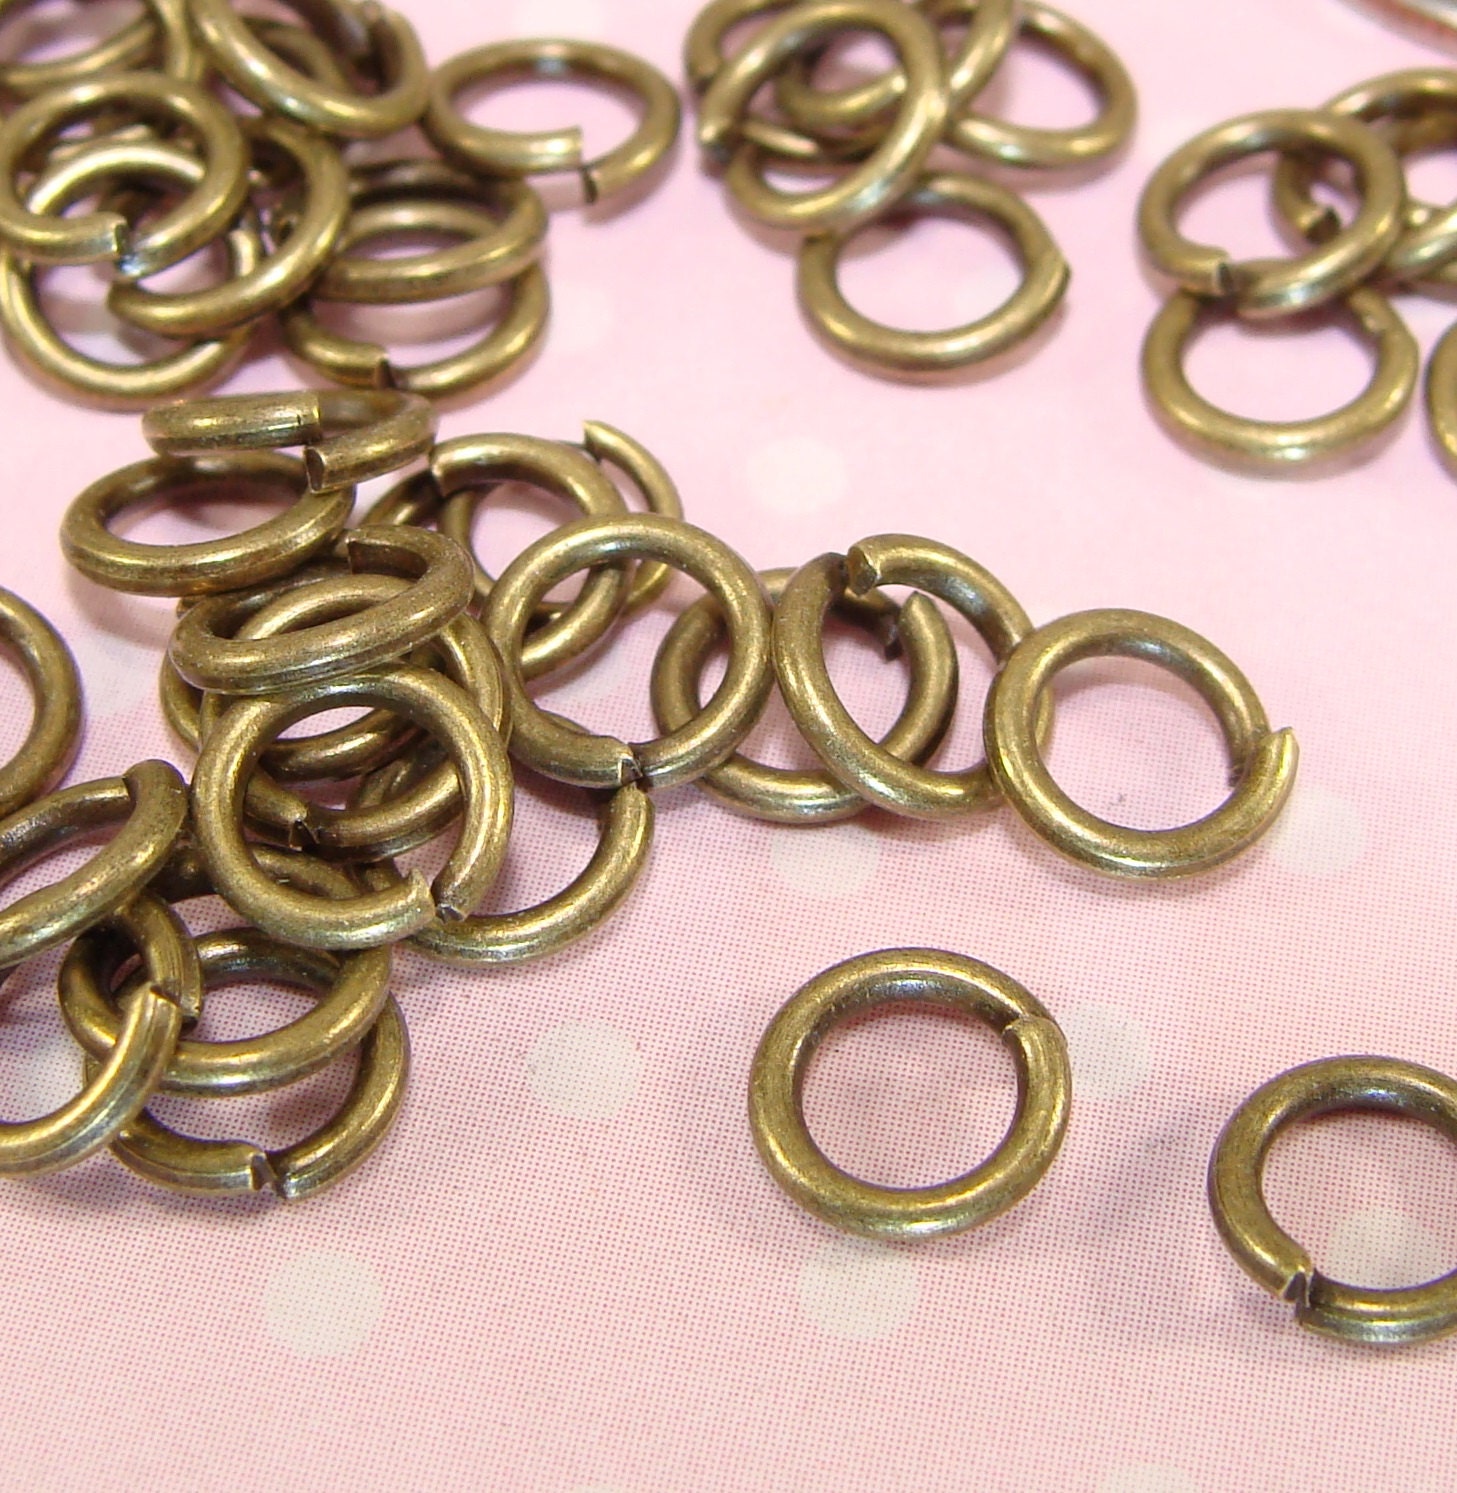 BEADNOVA 6mm Jump Rings for Keychains Assorted Colors Open Jump Rings for  Jewelry Making (900Pcs) 6mm 900pcs